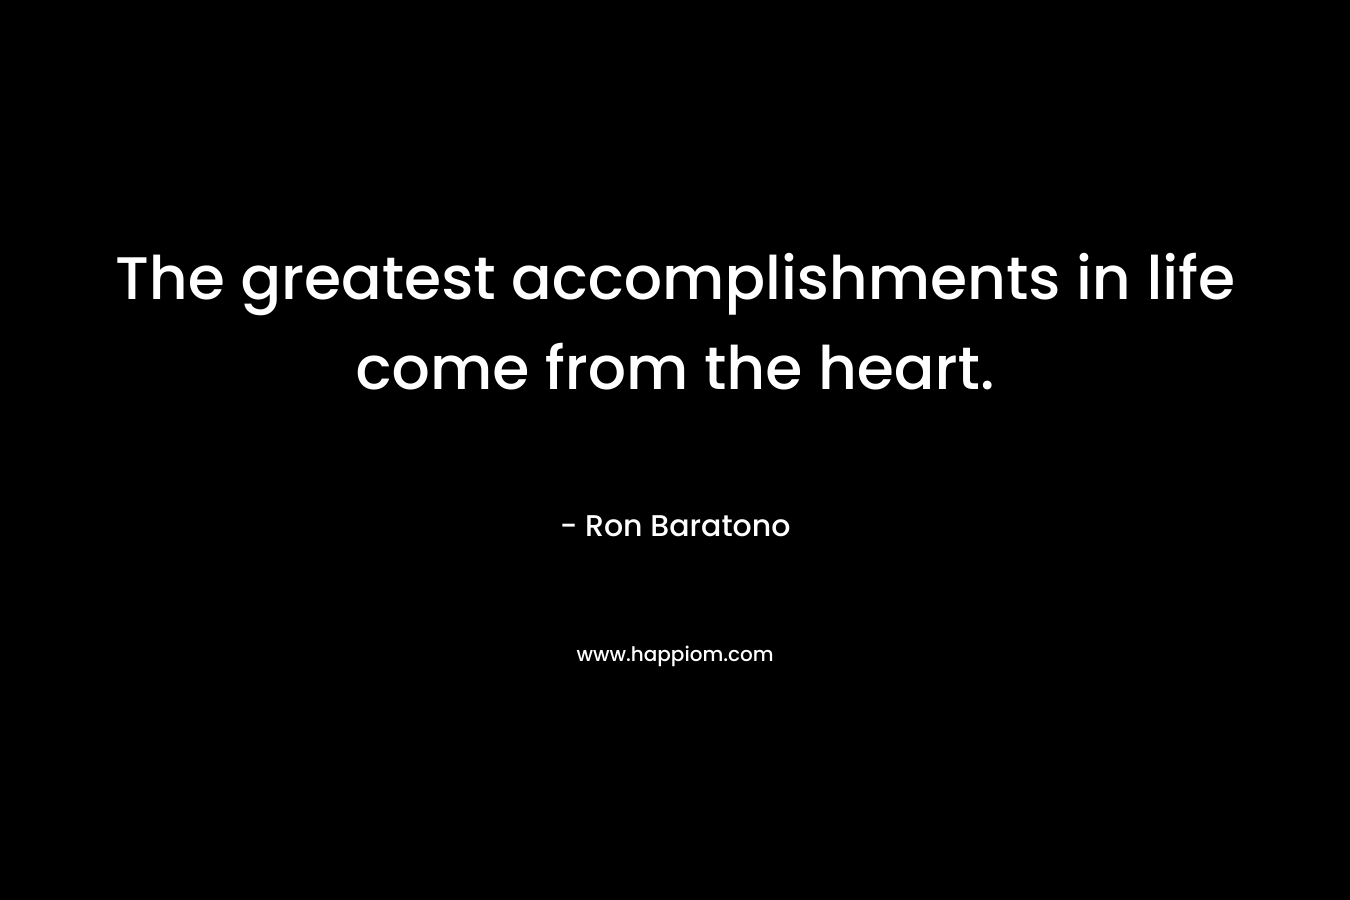 The greatest accomplishments in life come from the heart. – Ron Baratono